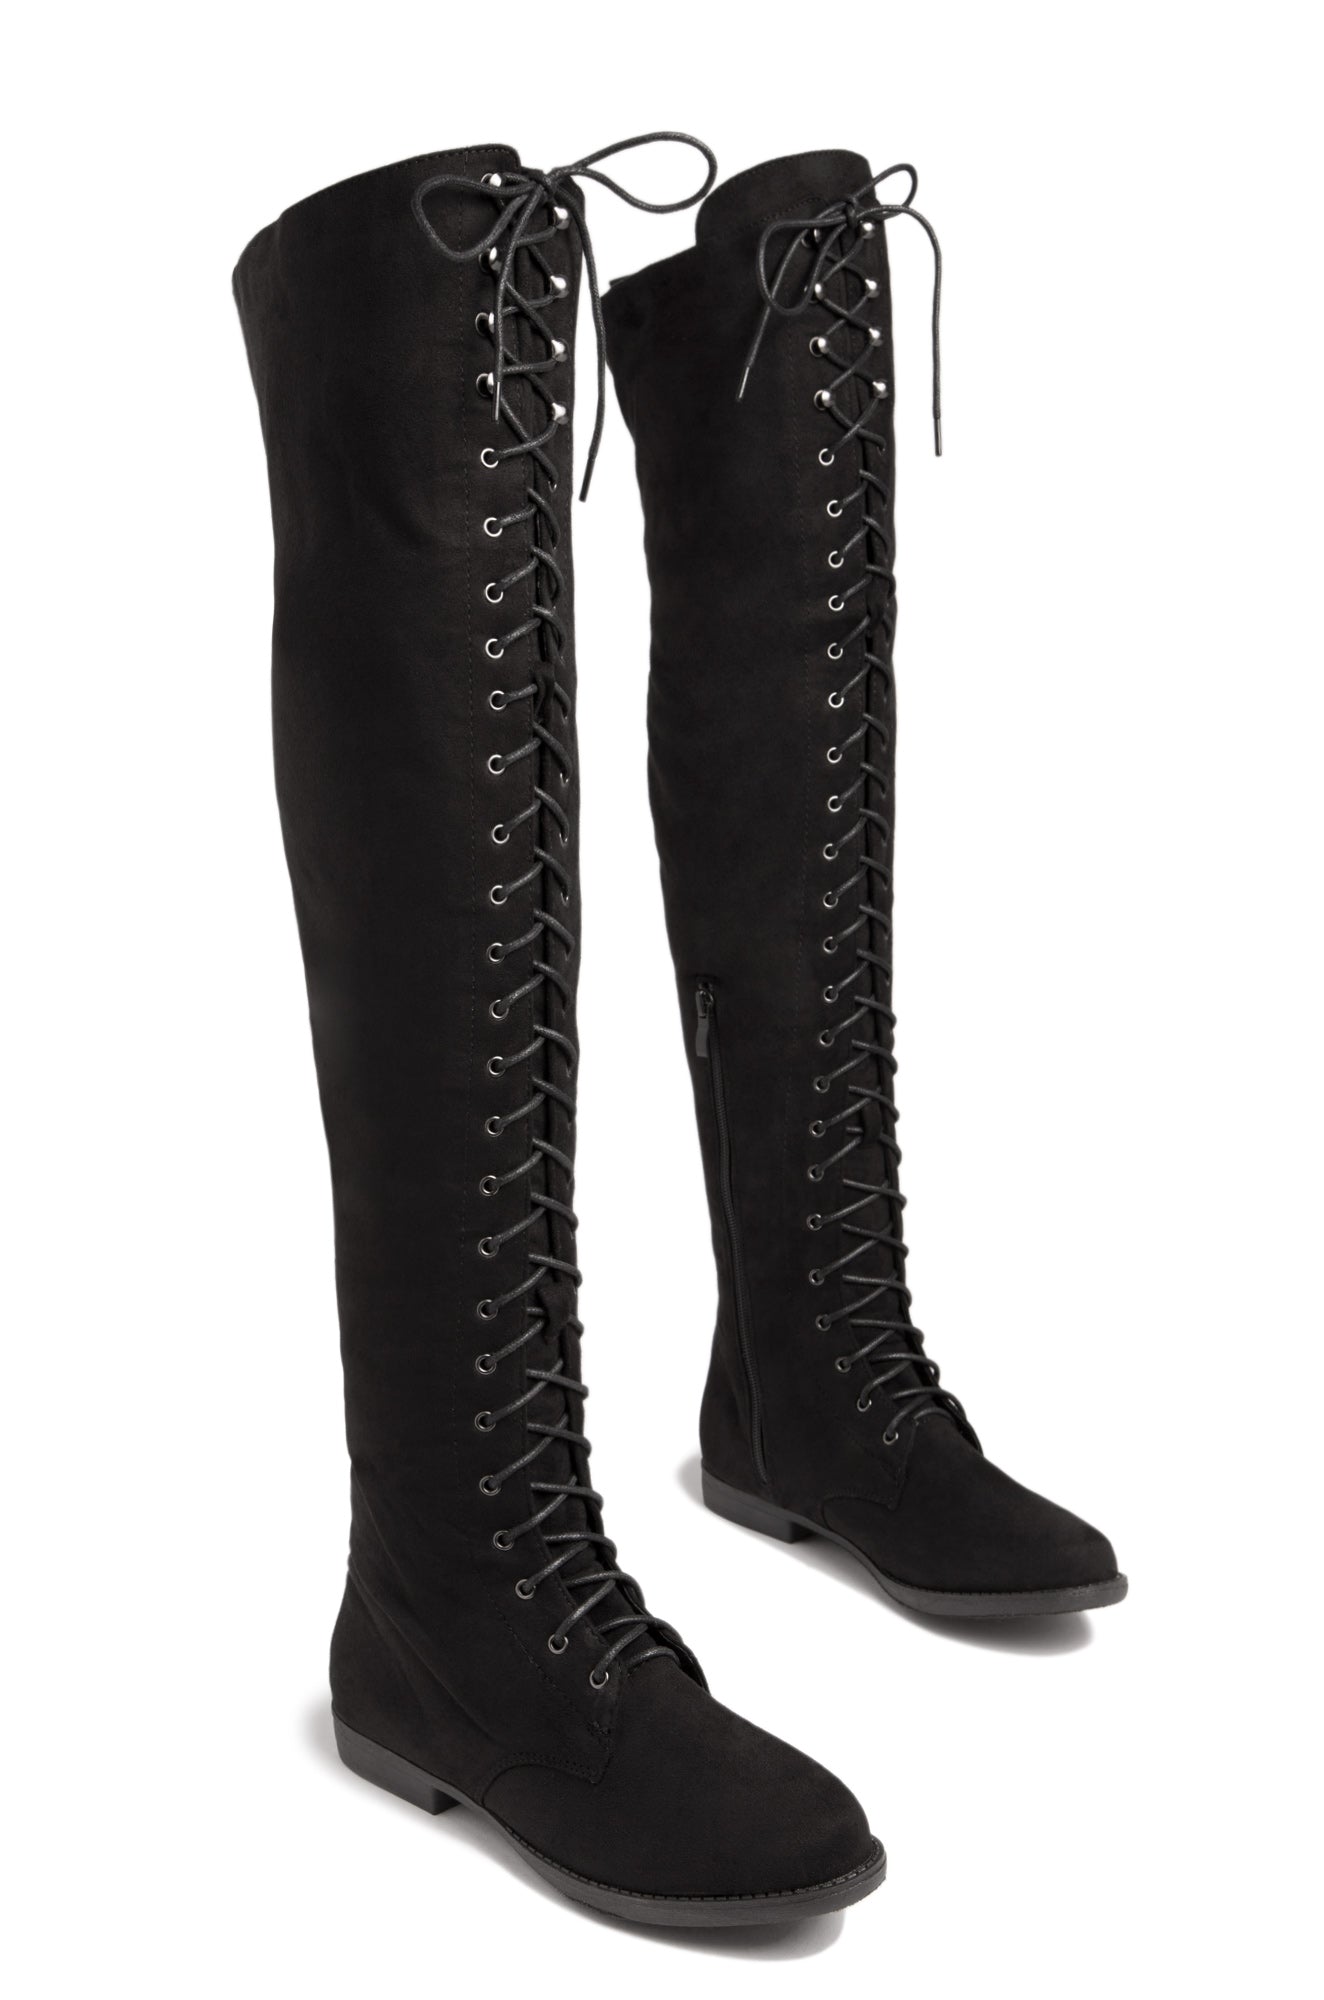 Miss Lola | Black Over The Knee Lace Up Boots – MISS LOLA